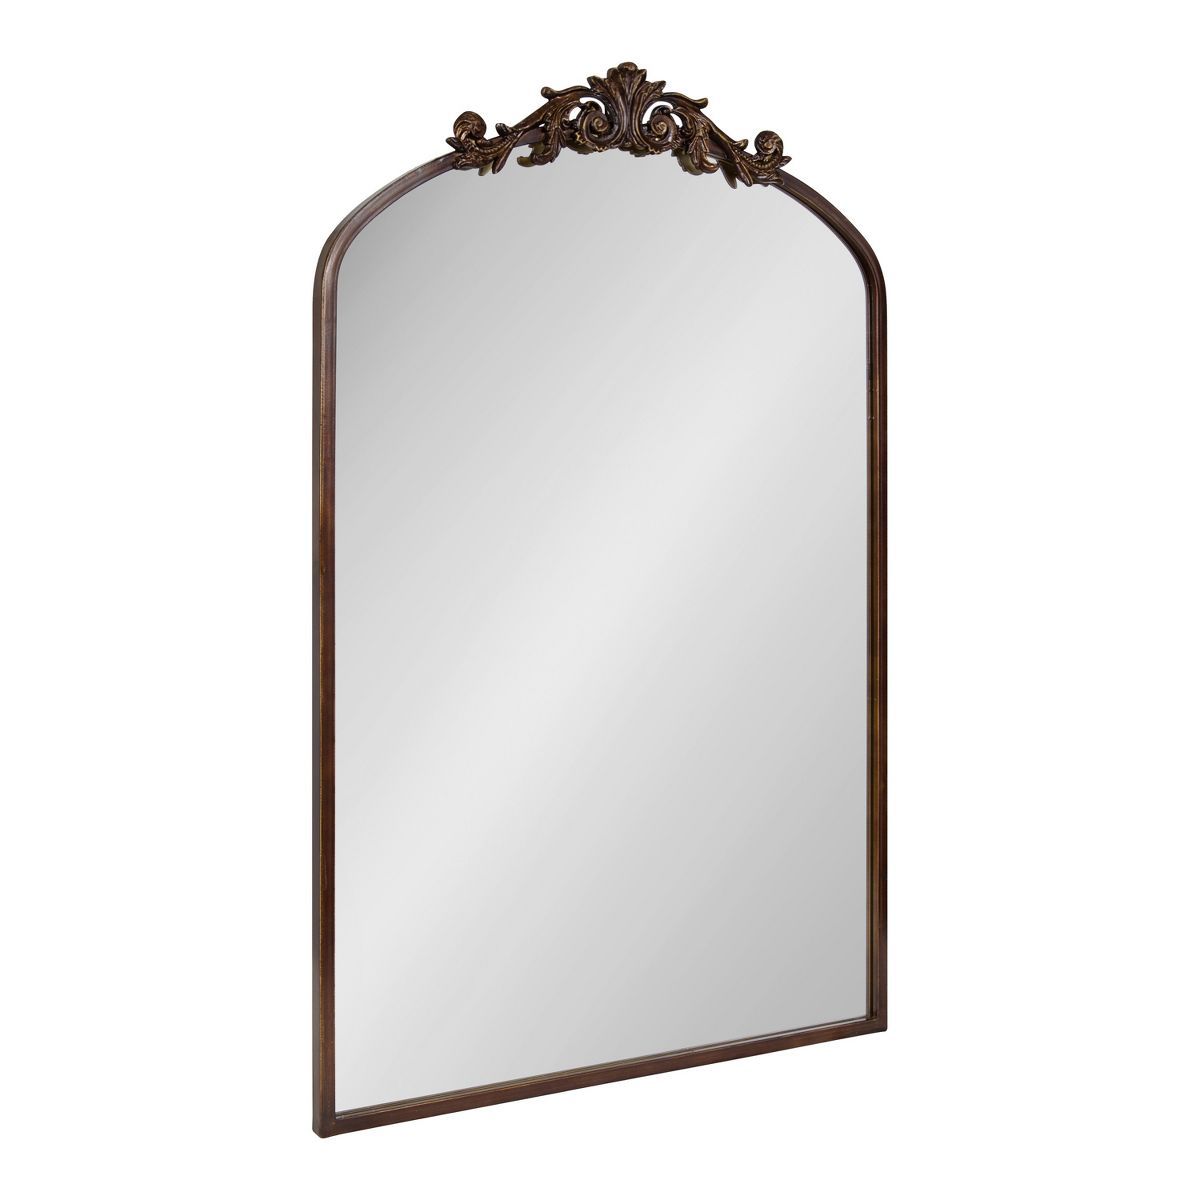 Kate and Laurel - Andover Arch Mirror with Hooks | Target